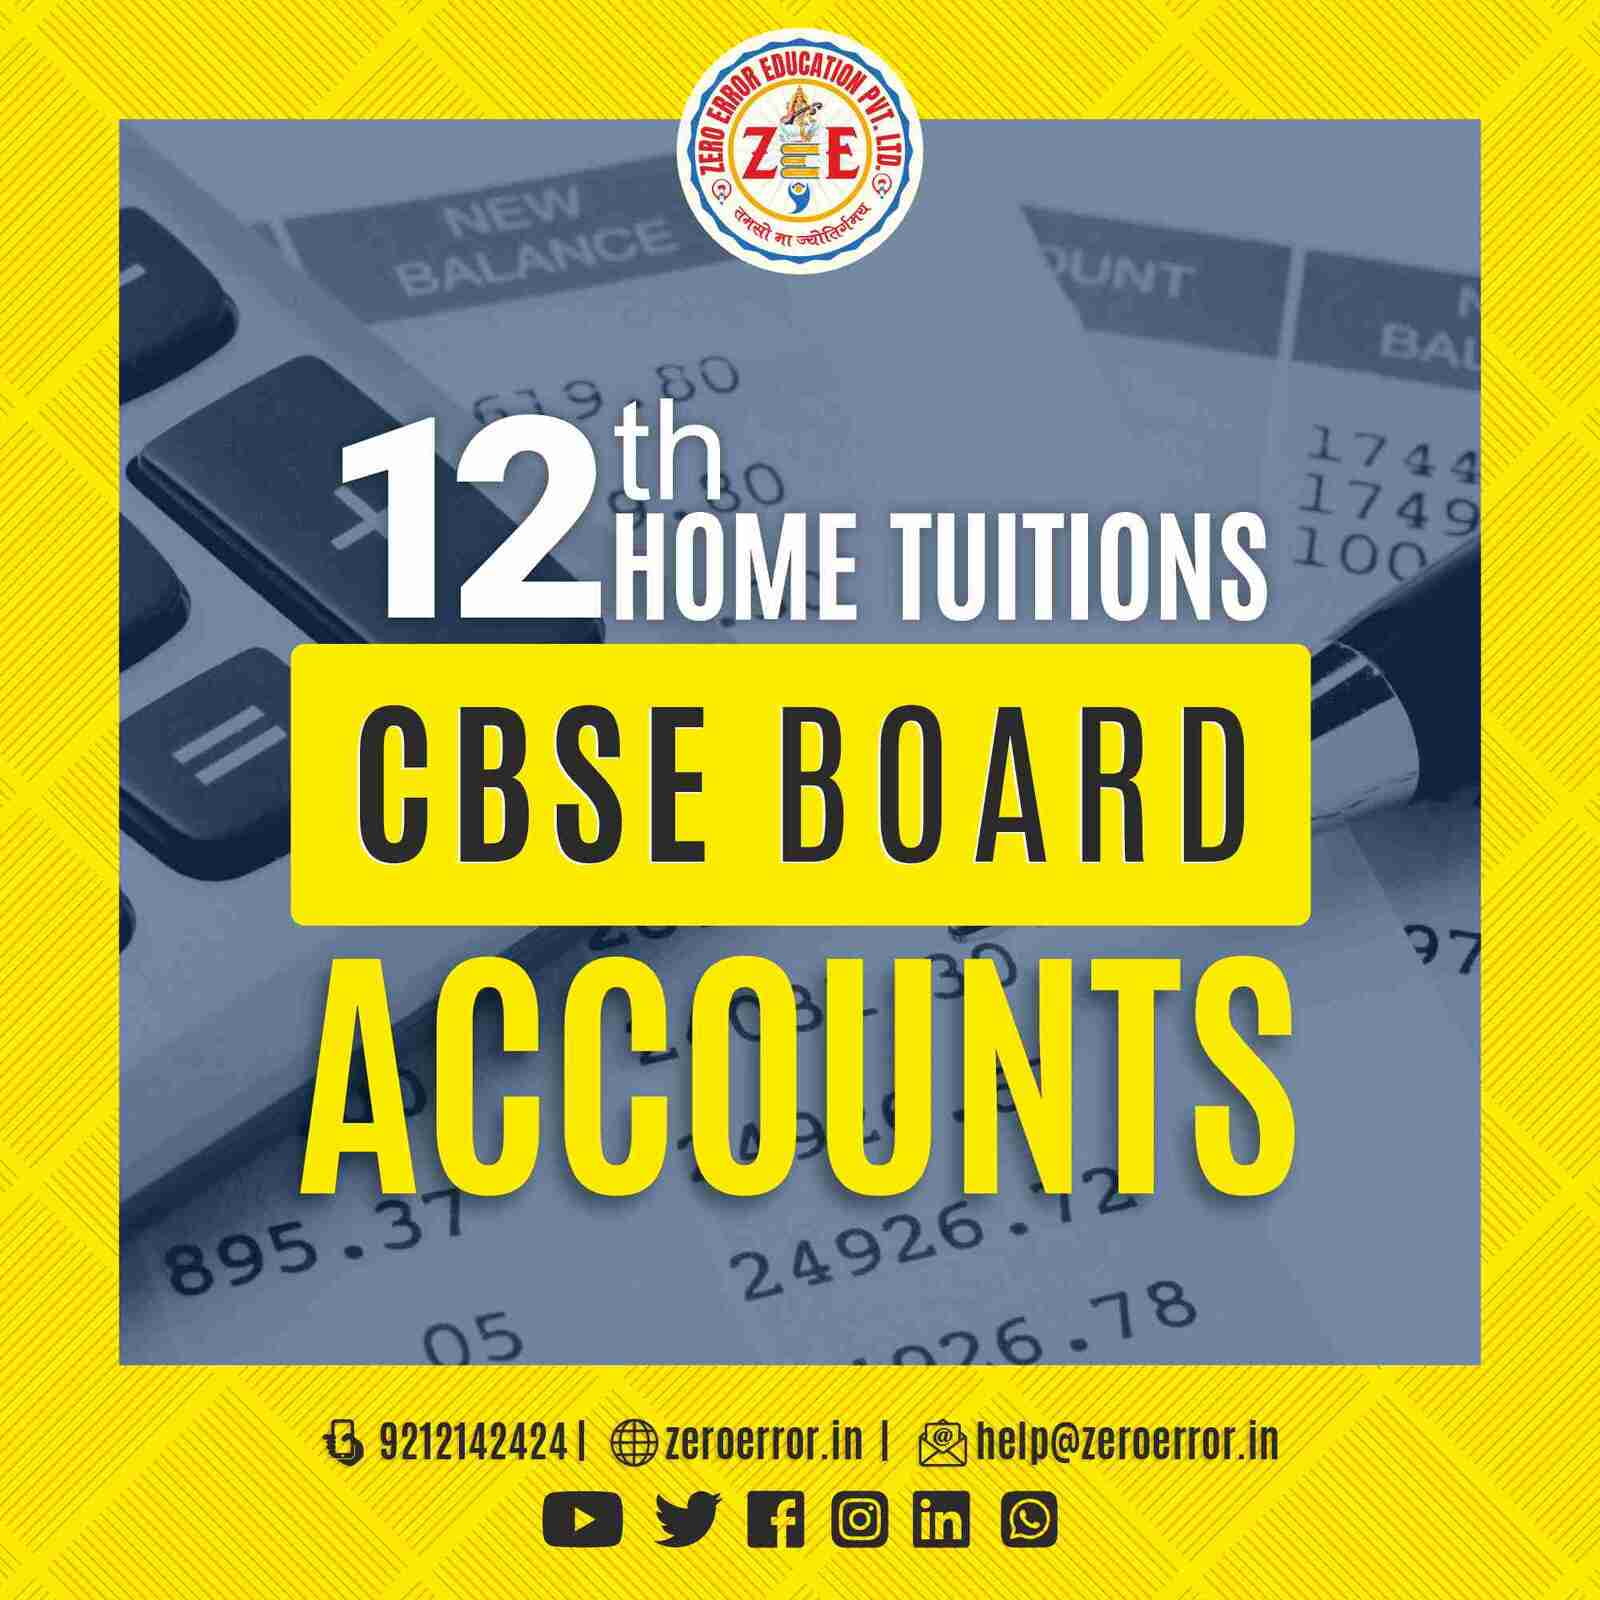 12th Grade CBSE Accounts Online Classes by Zero Error Education Prepare for your CBSE board exams with online and offline Accounts classes for 12th grade. Learn from experienced home tutors and get all the help you need to succeed. Enroll today at Zero Error Education. [https://zeroerror.in/] Call 9212142424 for more information.